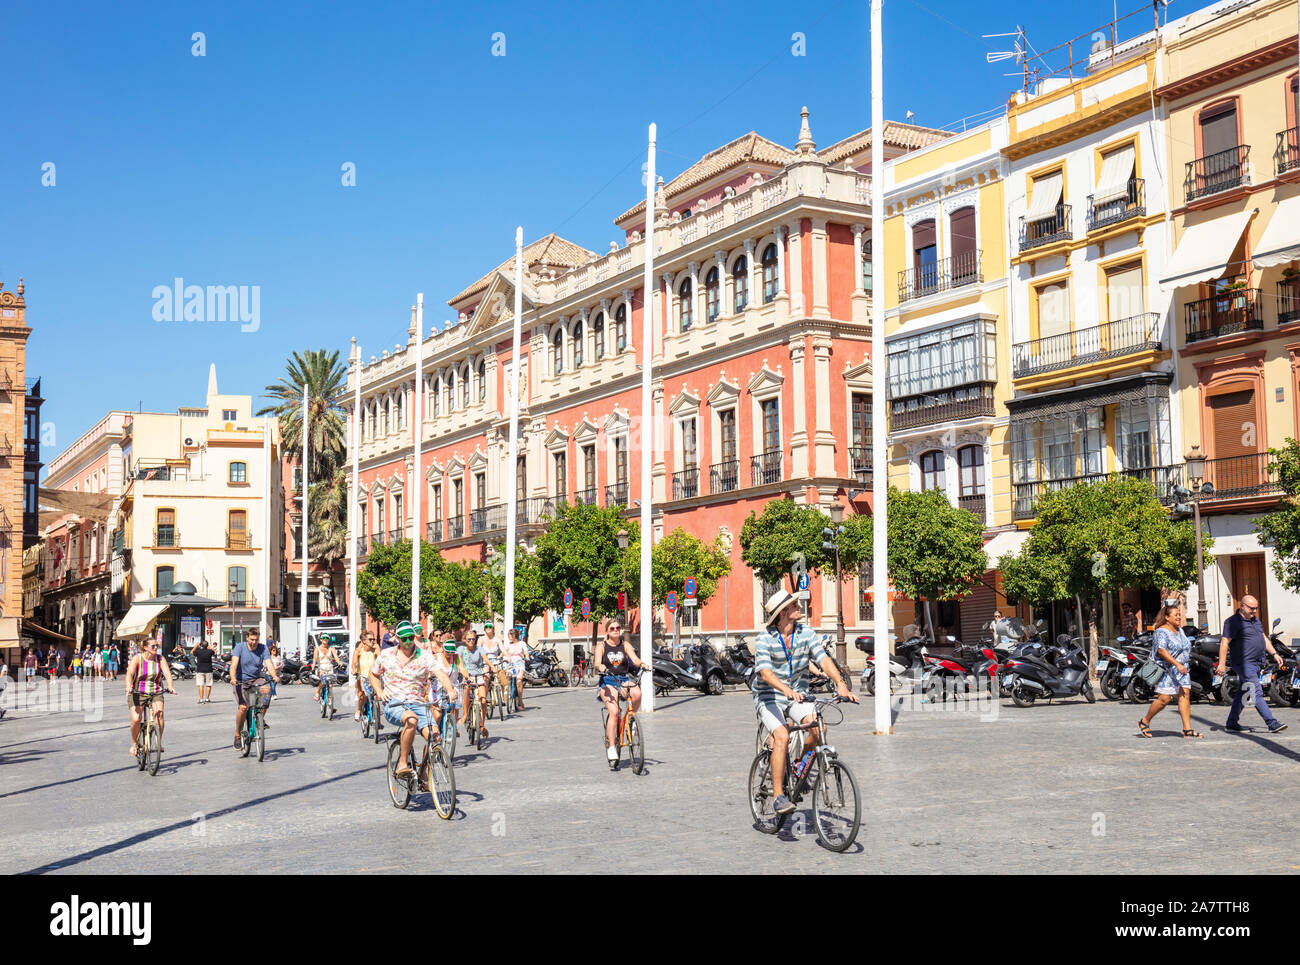 A cycle tour passing Typical spanish architecture of Buildings in the Plaza de San Francisco Seville Spain EU Europe Stock Photo